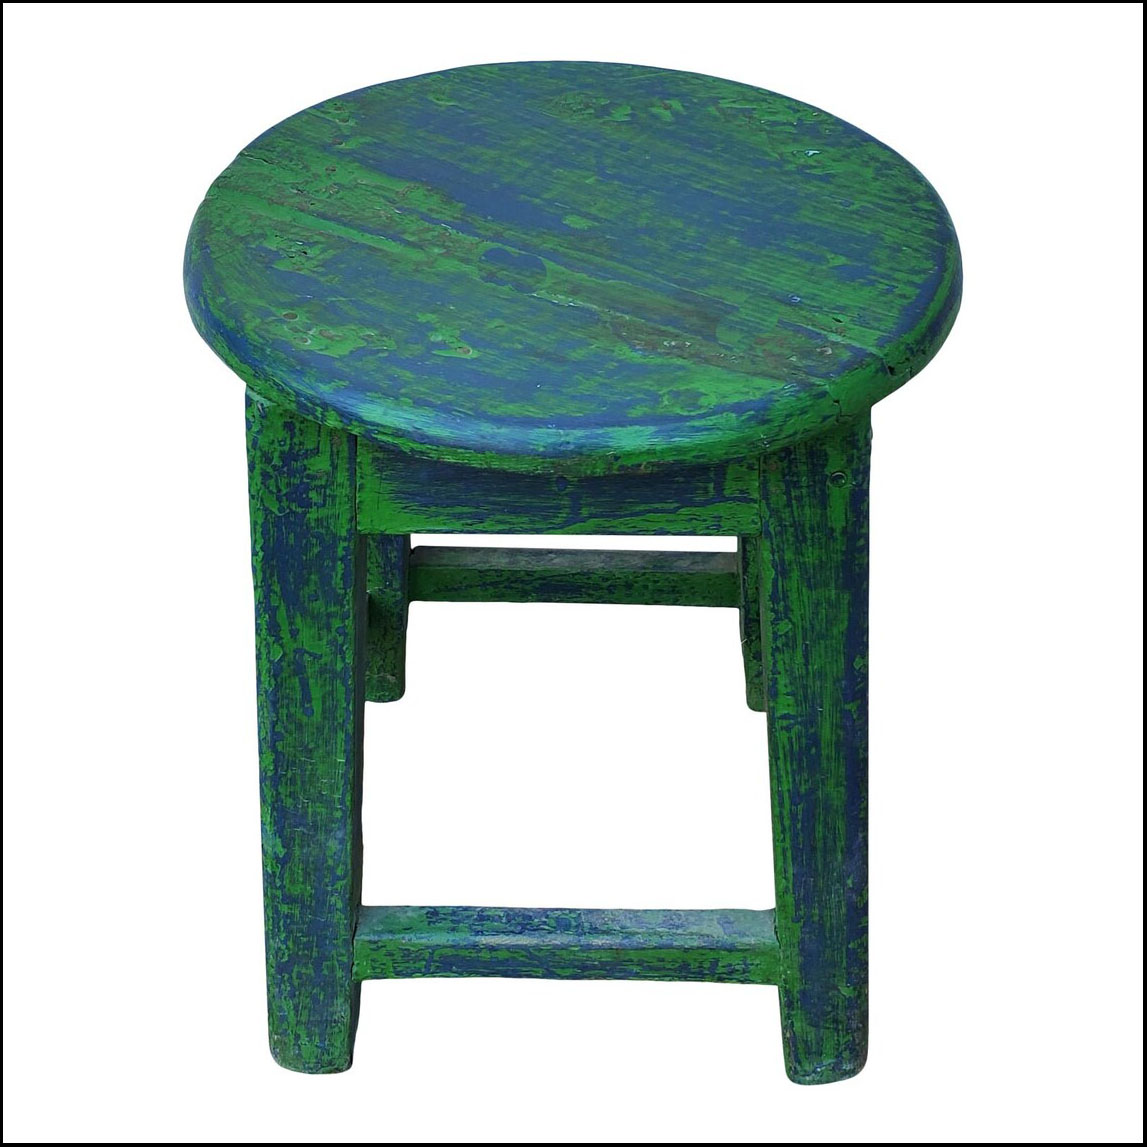 Hand Painted Moroccan Stool / Tabouret